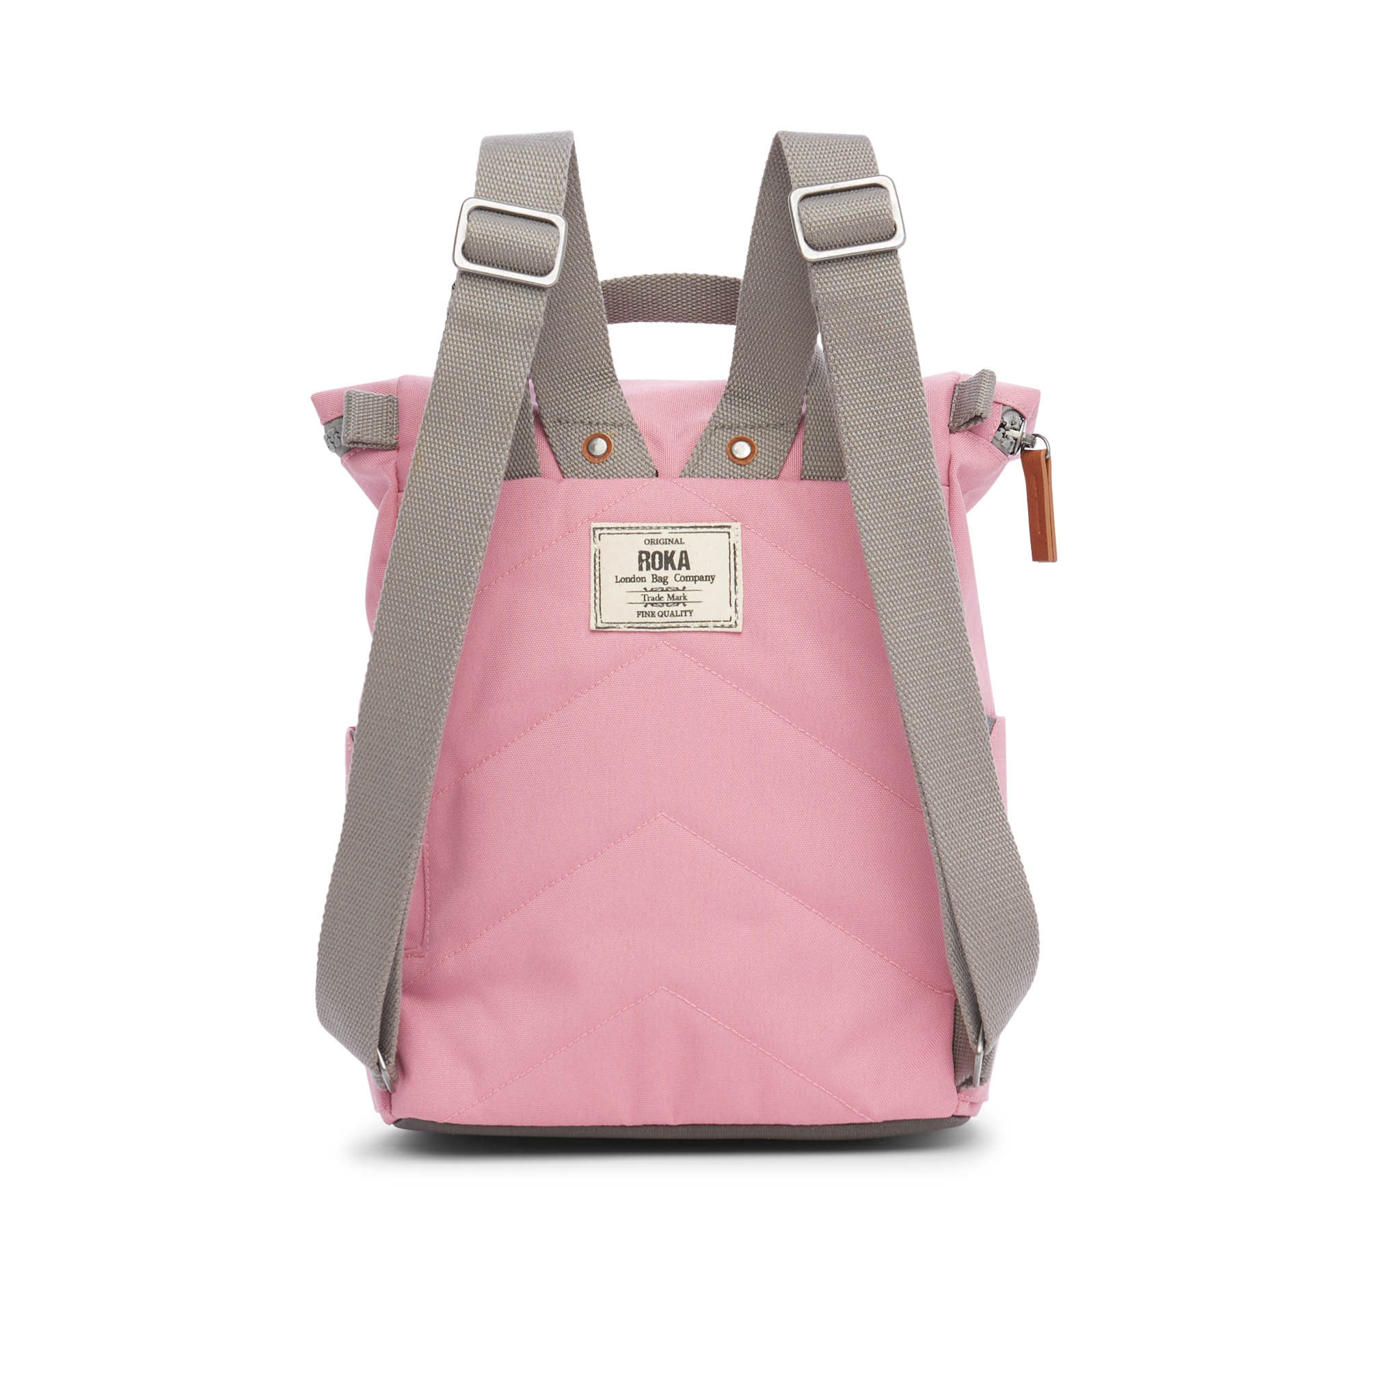 Roka Finchley Small Backpack - Blossom Pink